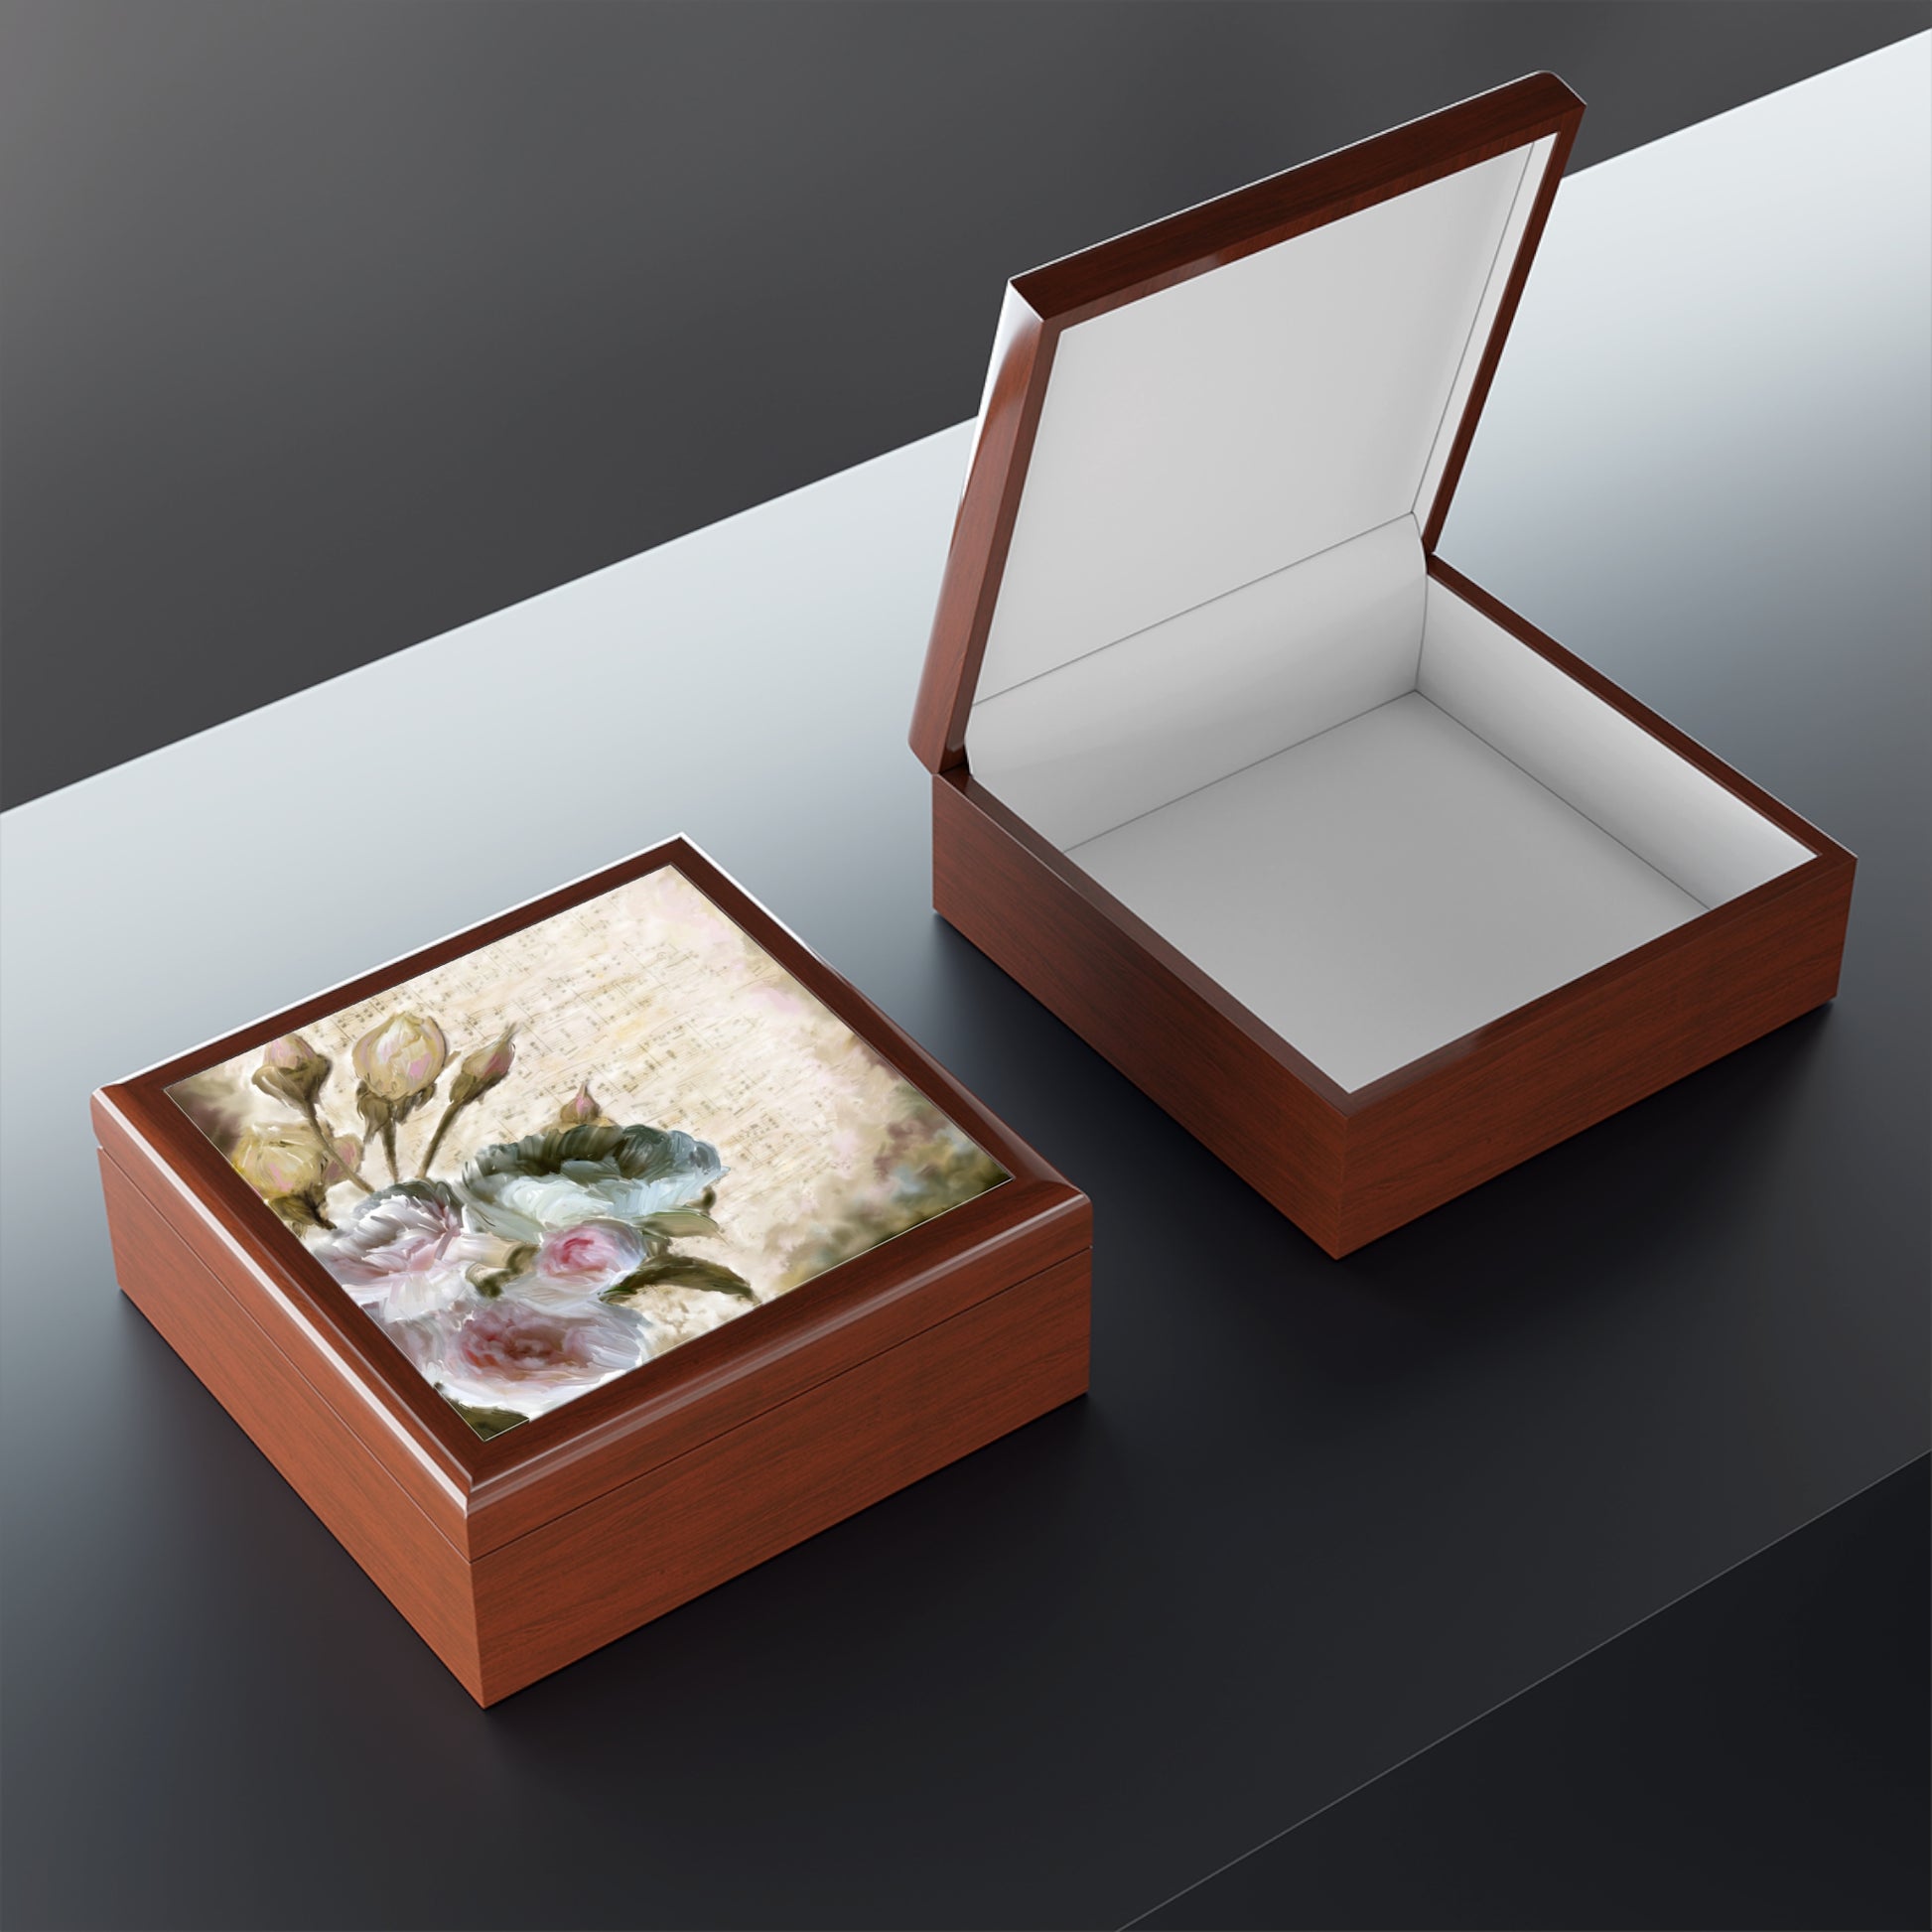 Lacquered Wood Keepsake/Jewelry Box - Roses and Music Notes  box interior